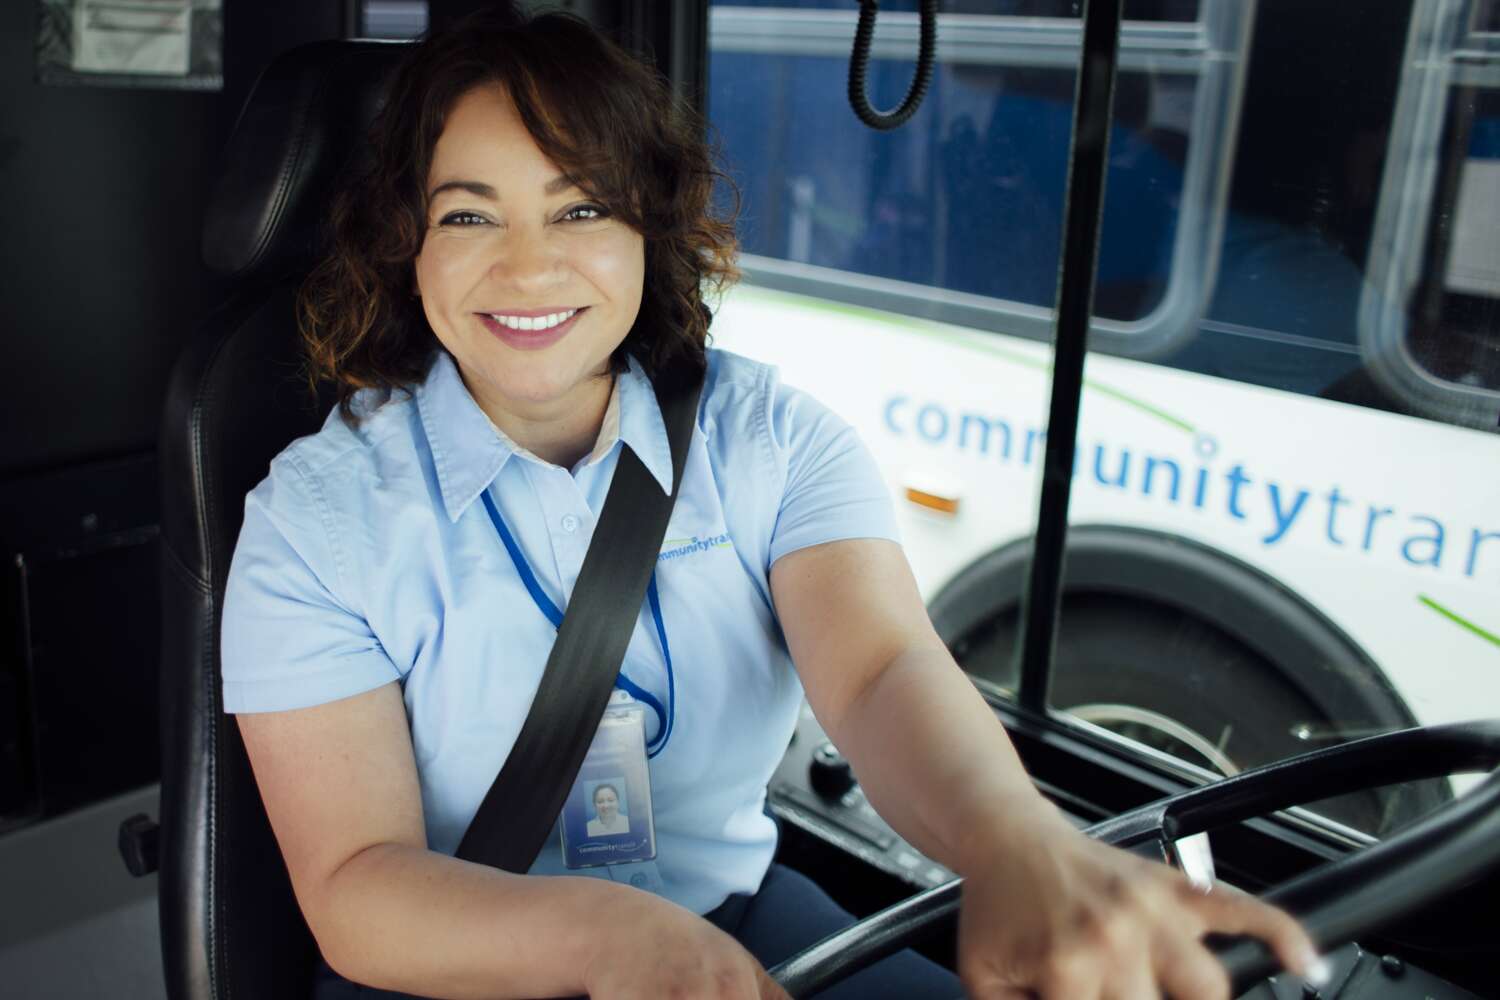 A CT bus driver smiles from behind the wheel.